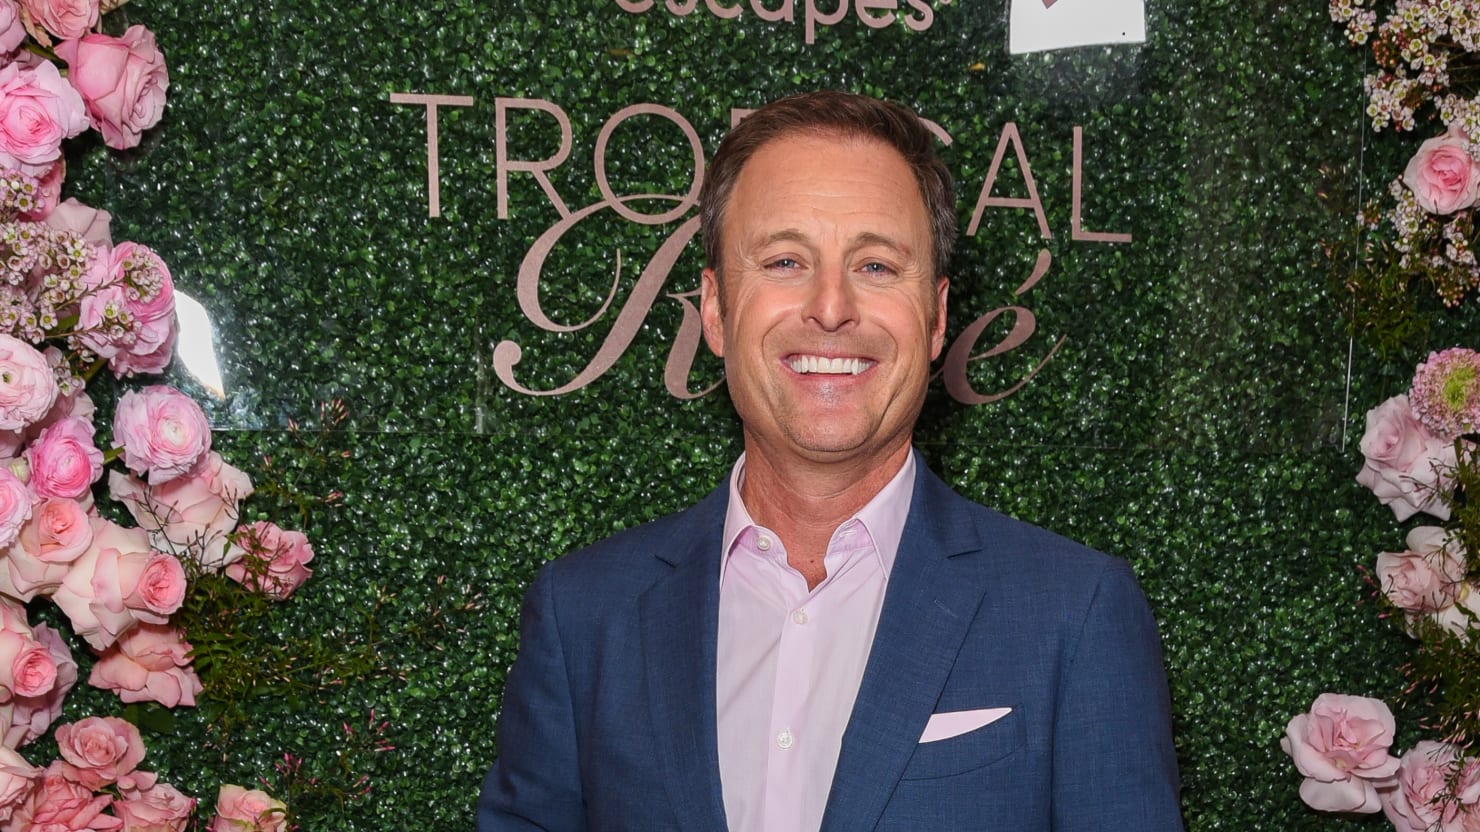 ‘The Bachelor’ presents Chris Harrison to take ‘a step further’ to Furus of racism